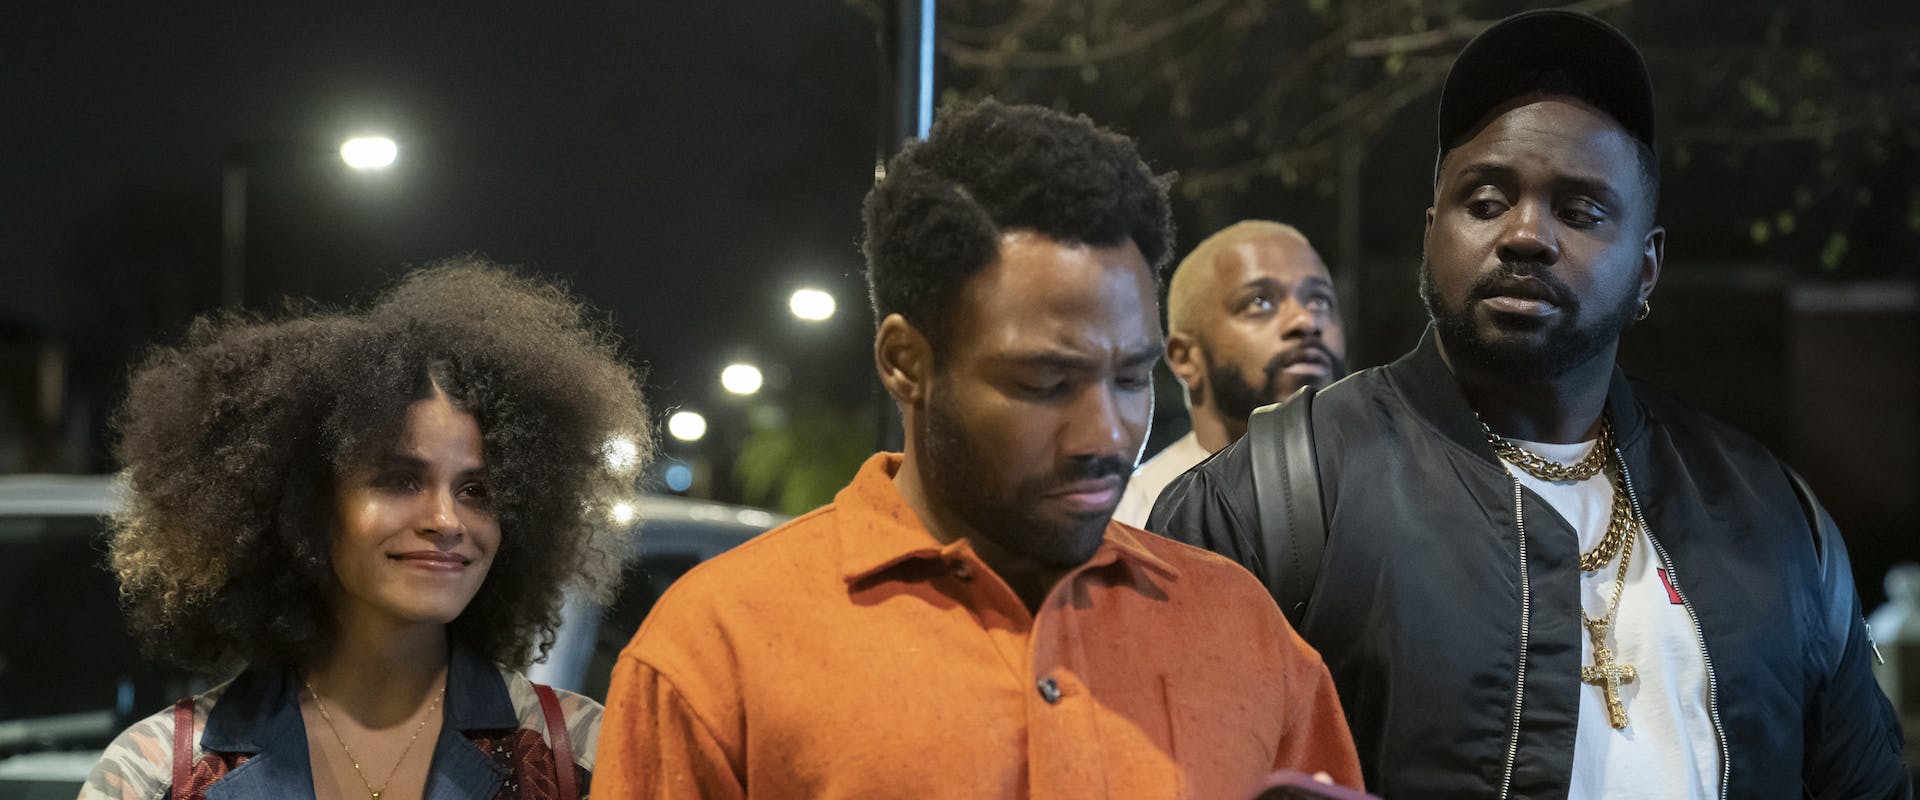 ATLANTA actors (L-R) ZAZIE BEETZ, DONALD GLOVER, LAKEITH STANFIELD and BRYAN TYREE HENRY